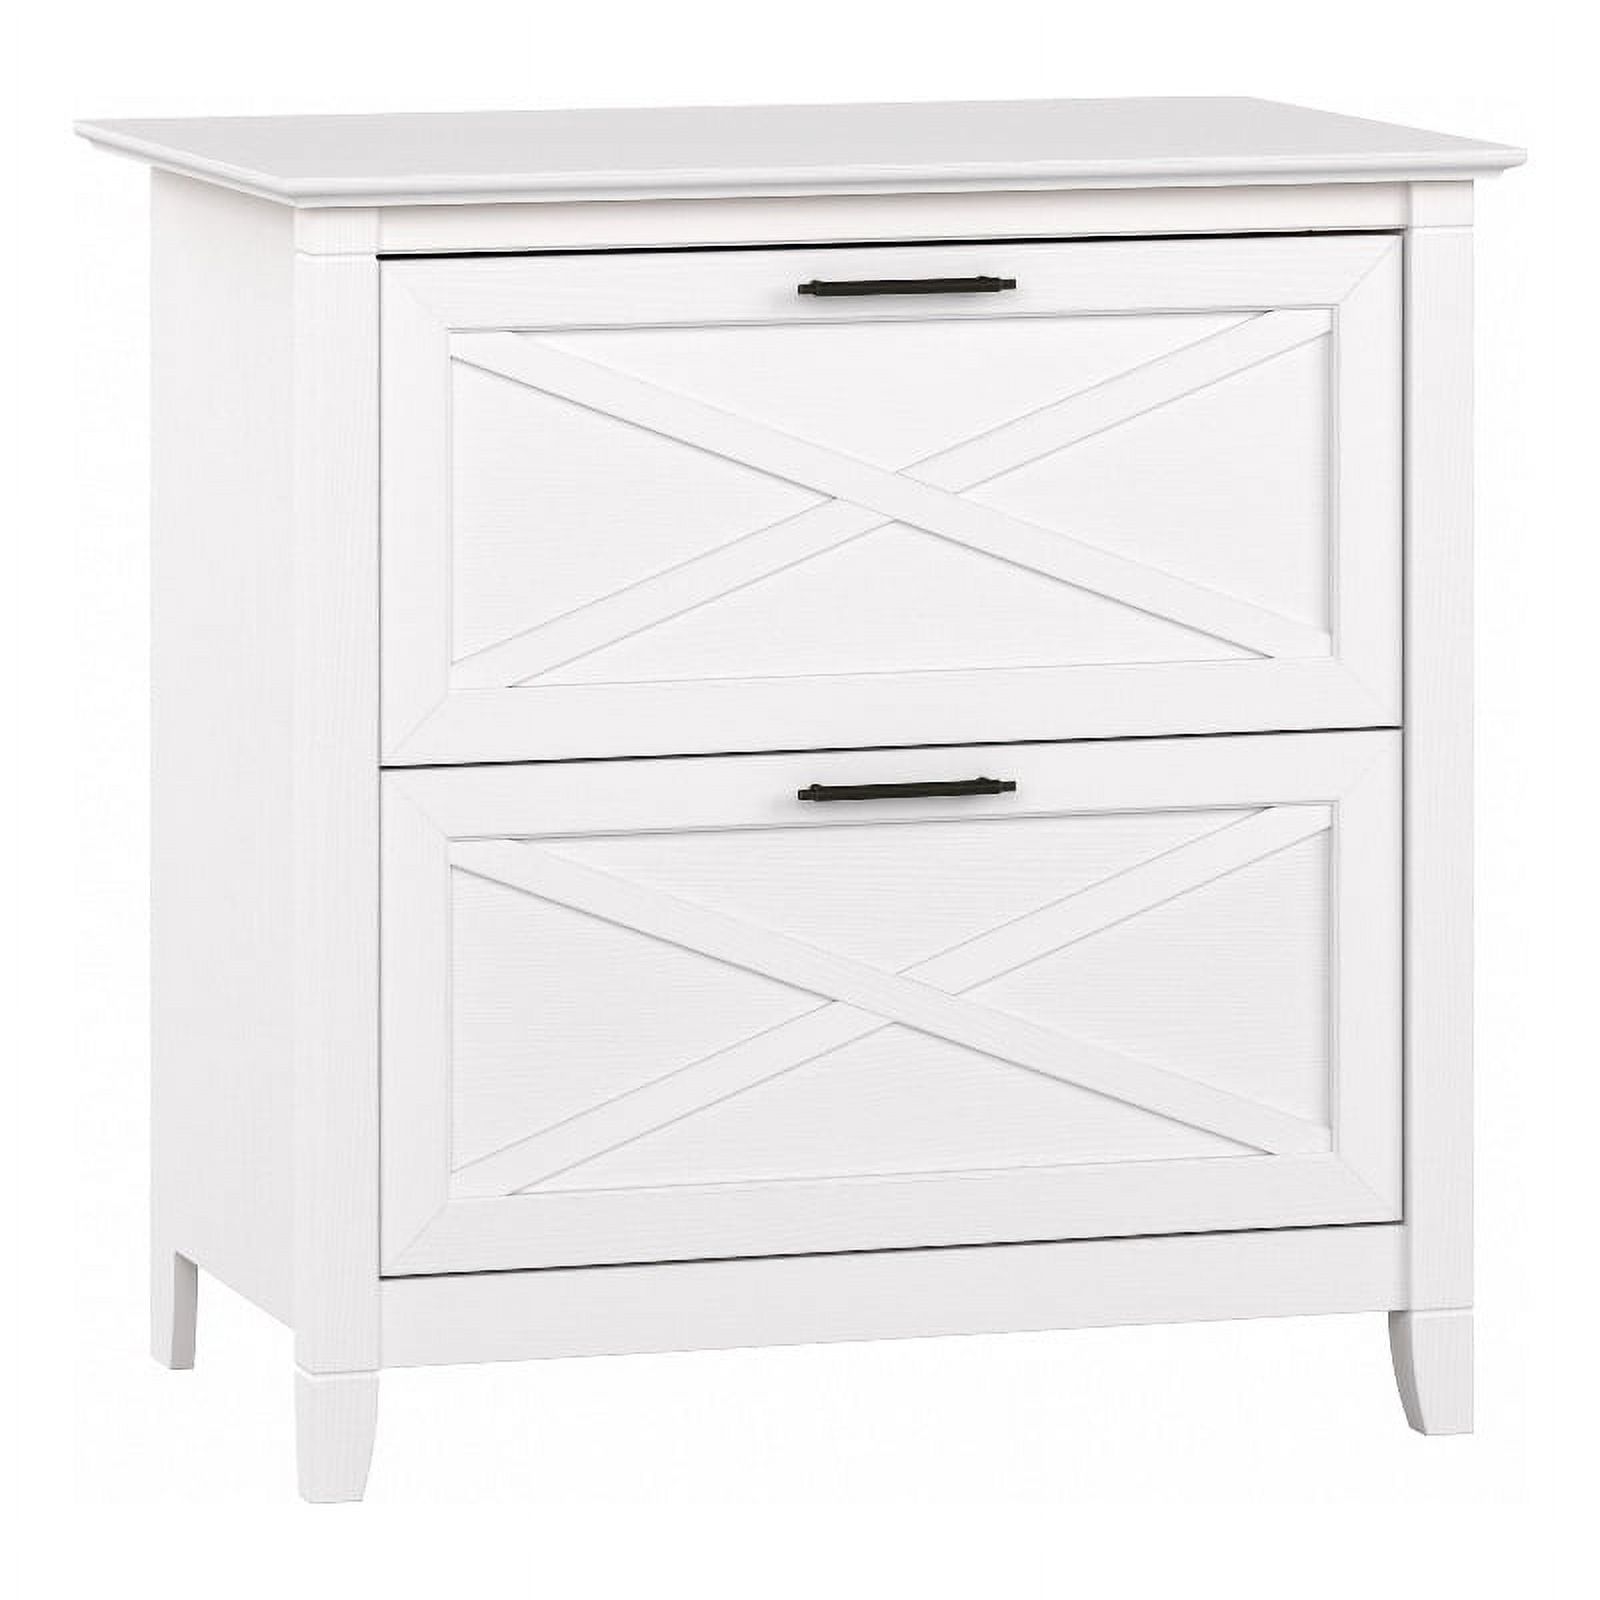 Scranton & Co 2 Drawers Contemporary Wood File Cabinet in Oak - image 1 of 9